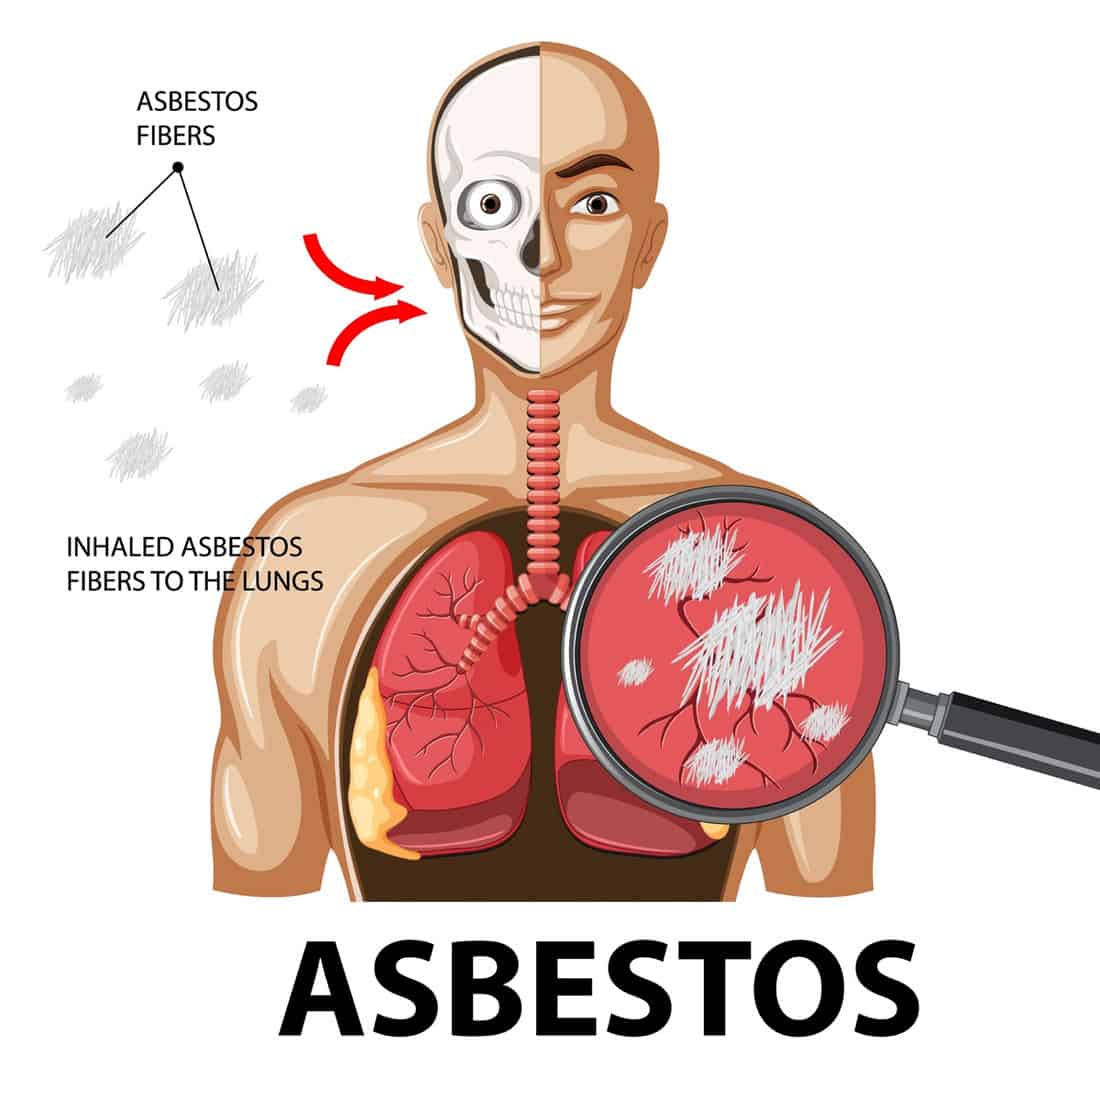 Diagram showing asbestosis in lungs illustration